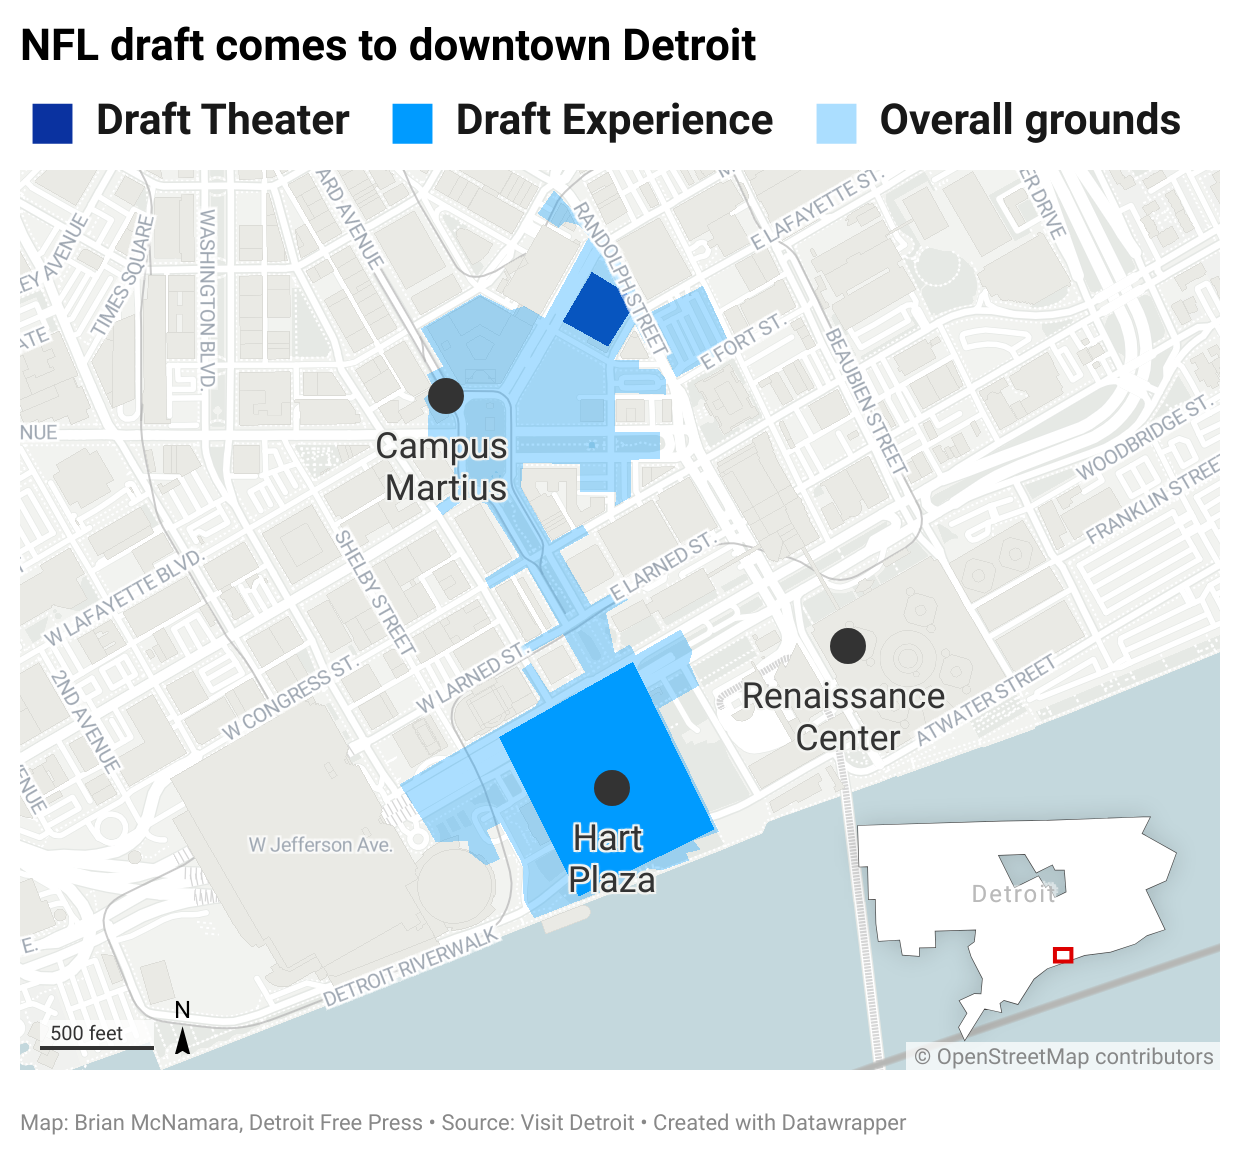 A map shows the NFL draft's footprint in downtown Detroit. The NFL draft will be in Detroit from April 25-27, 2024.